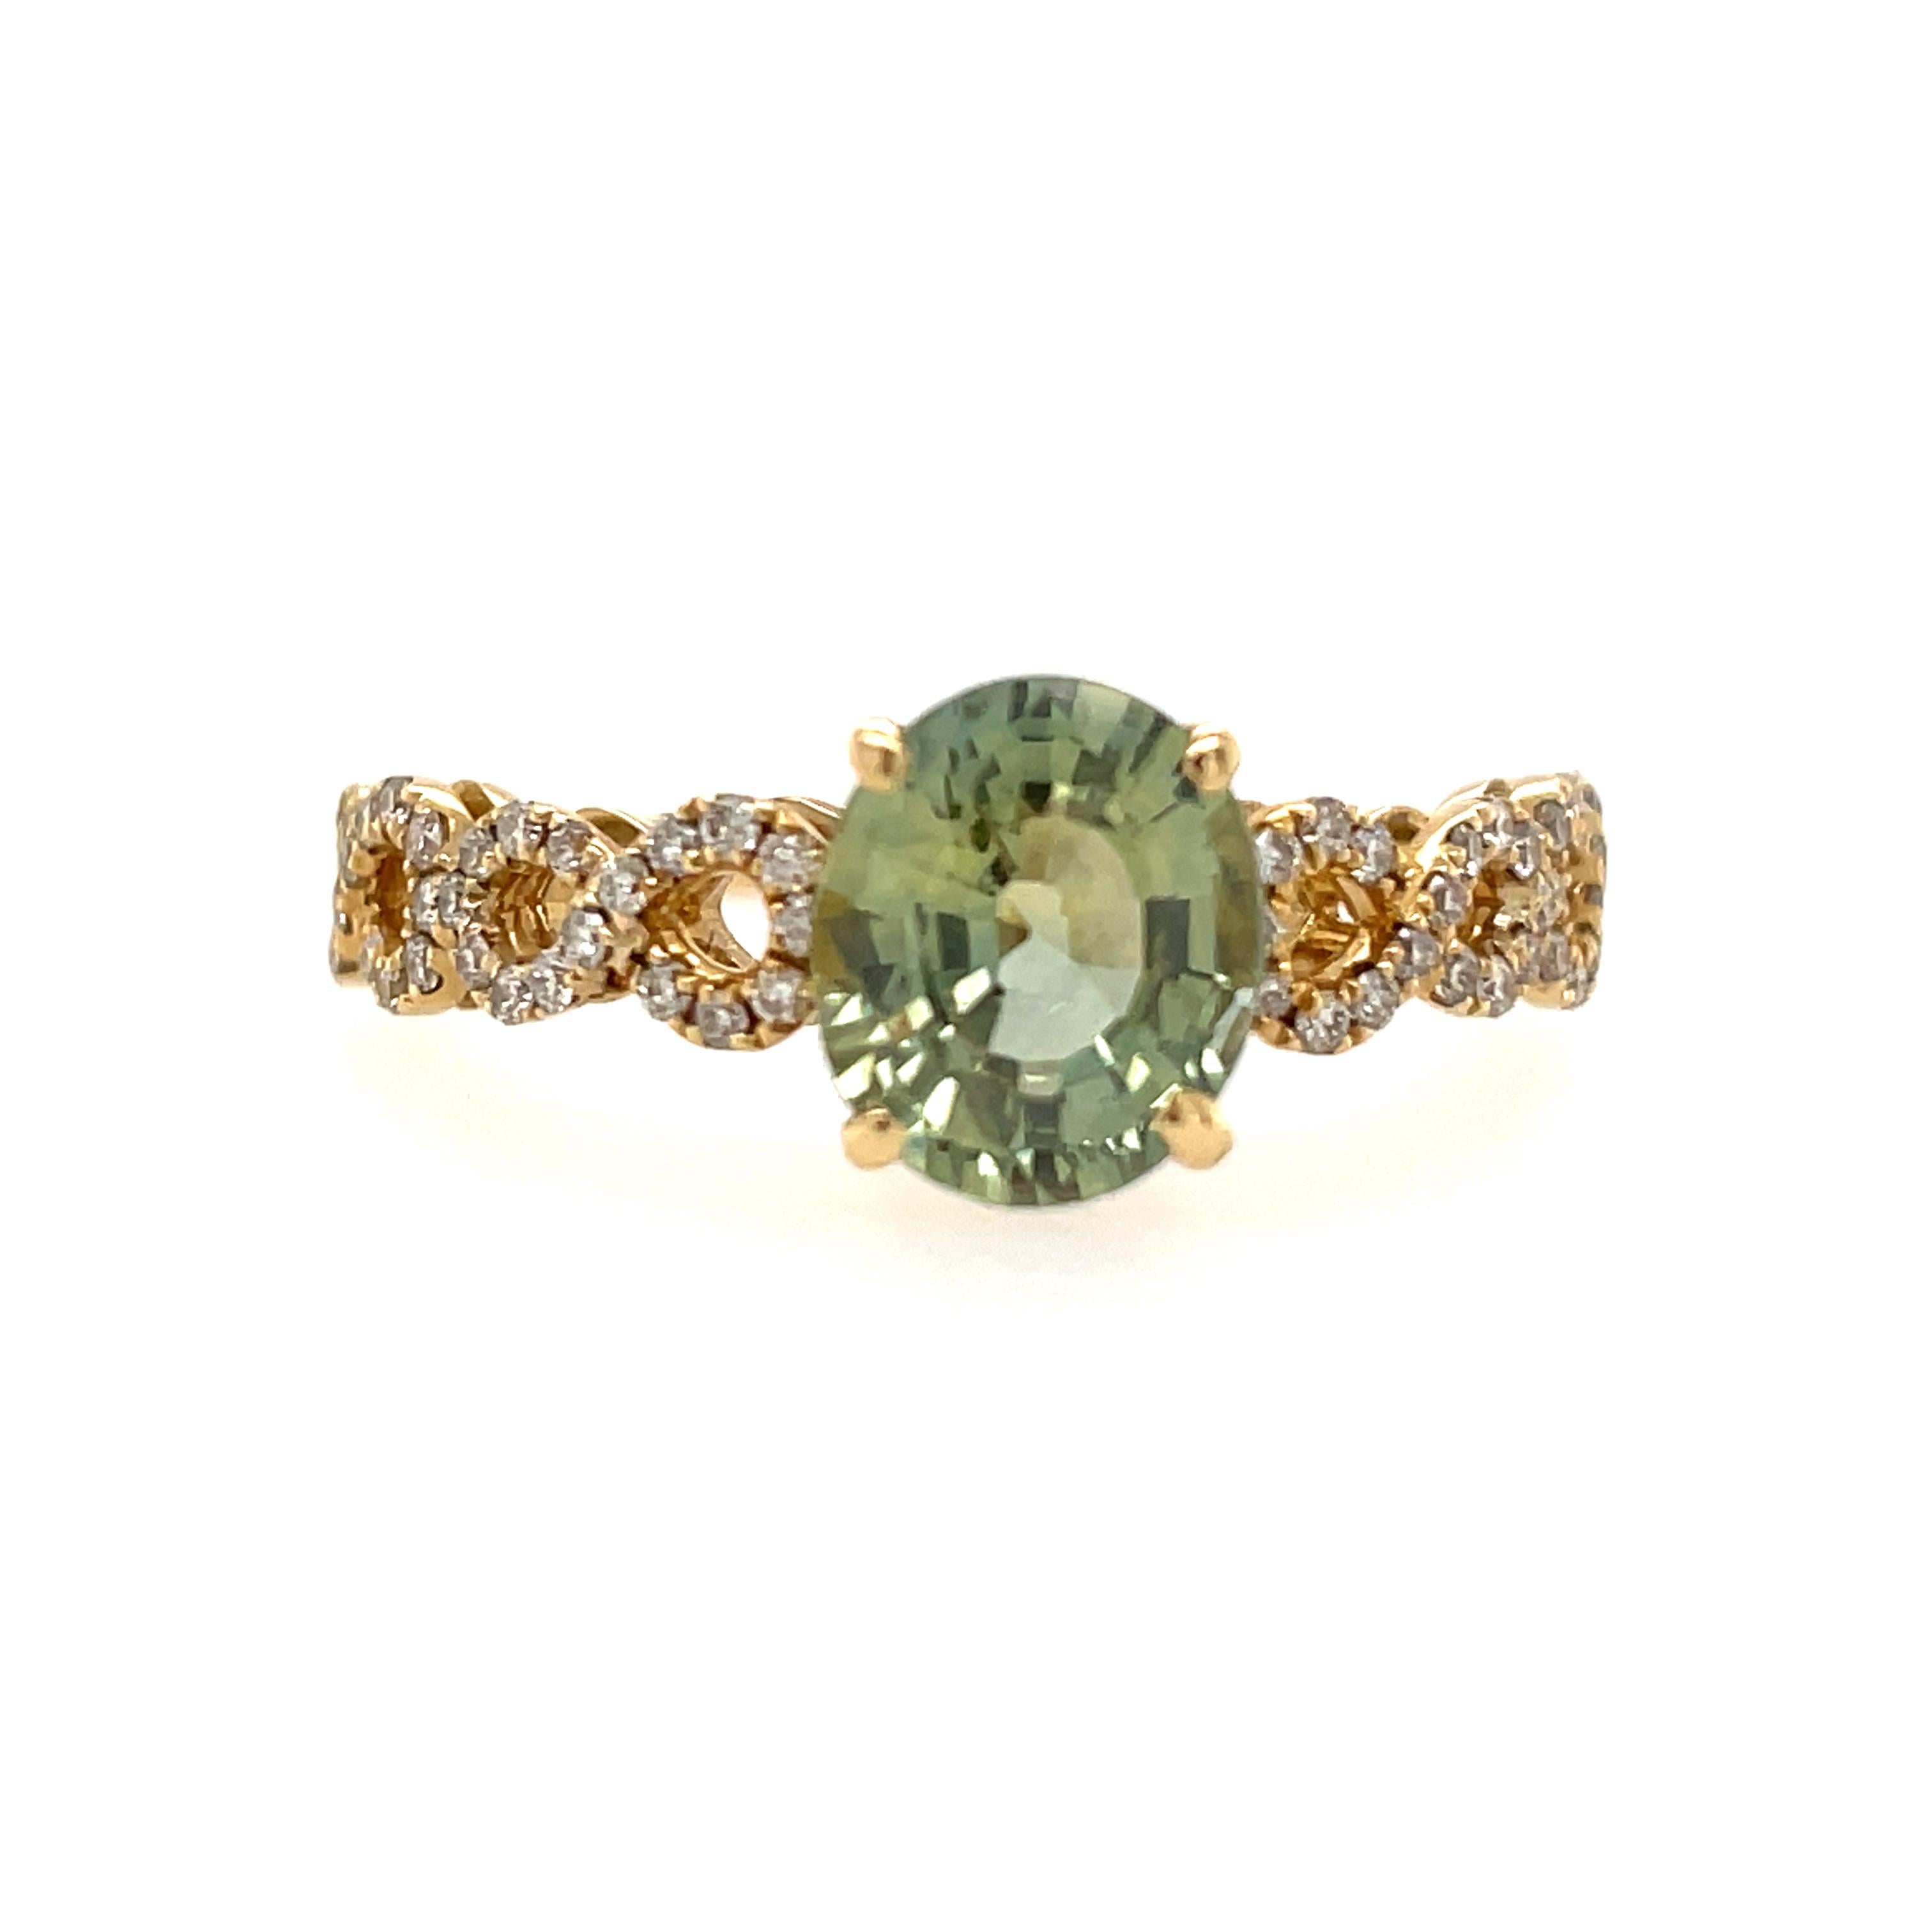 Featuring a rare chrysoberyl gemstone, this ring will become your favorite everyday ring. 

The 1.02ct vivid green Chrysoberyl is a classic oval shape, accented with high sparkle 0.25ct diamonds.  The gems are set in solid 14k yellow gold, which